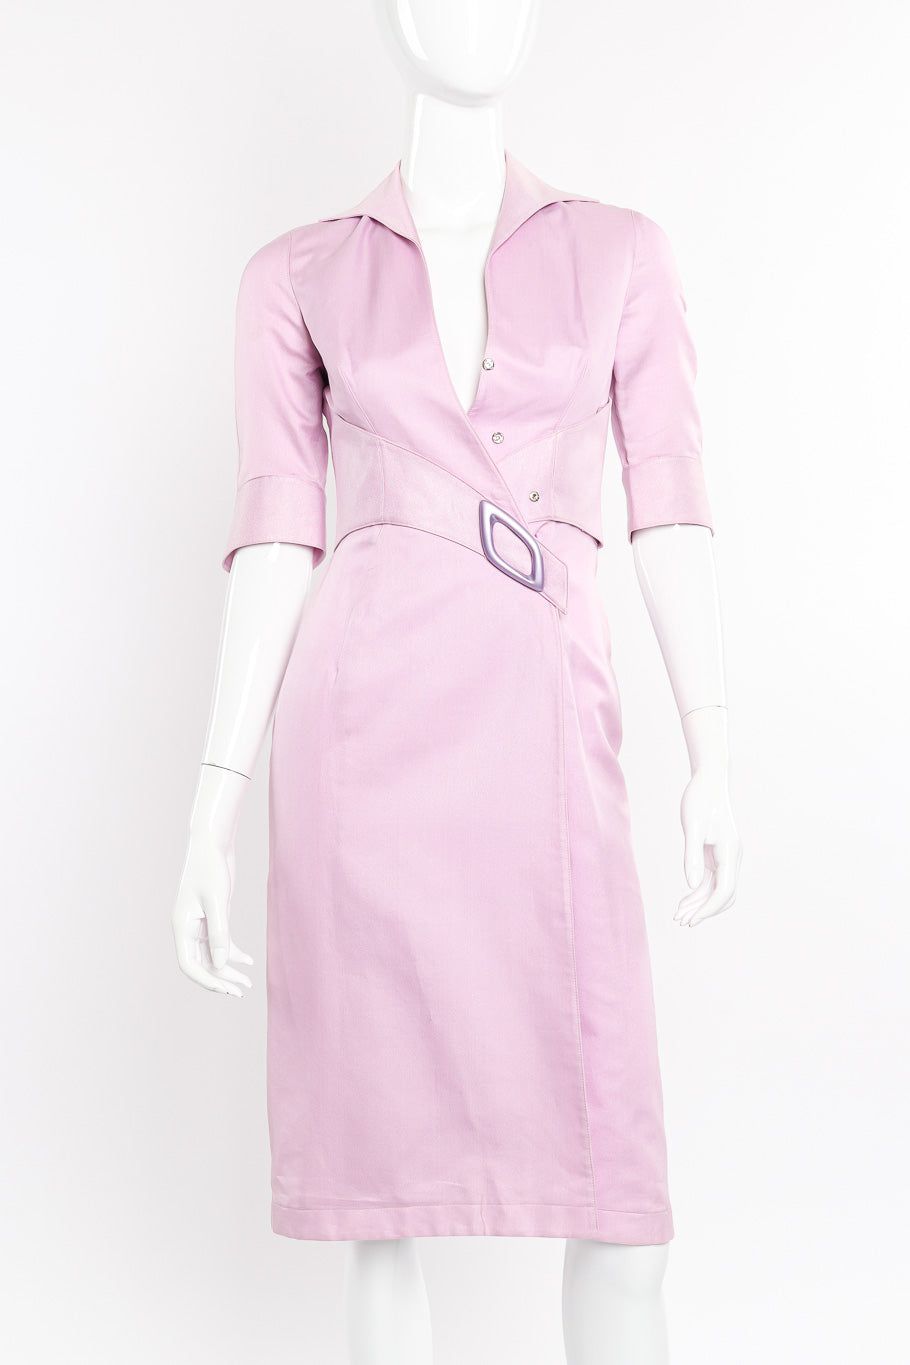 Lilac wrap dress by Thierry Mugler on mannequin @recessla